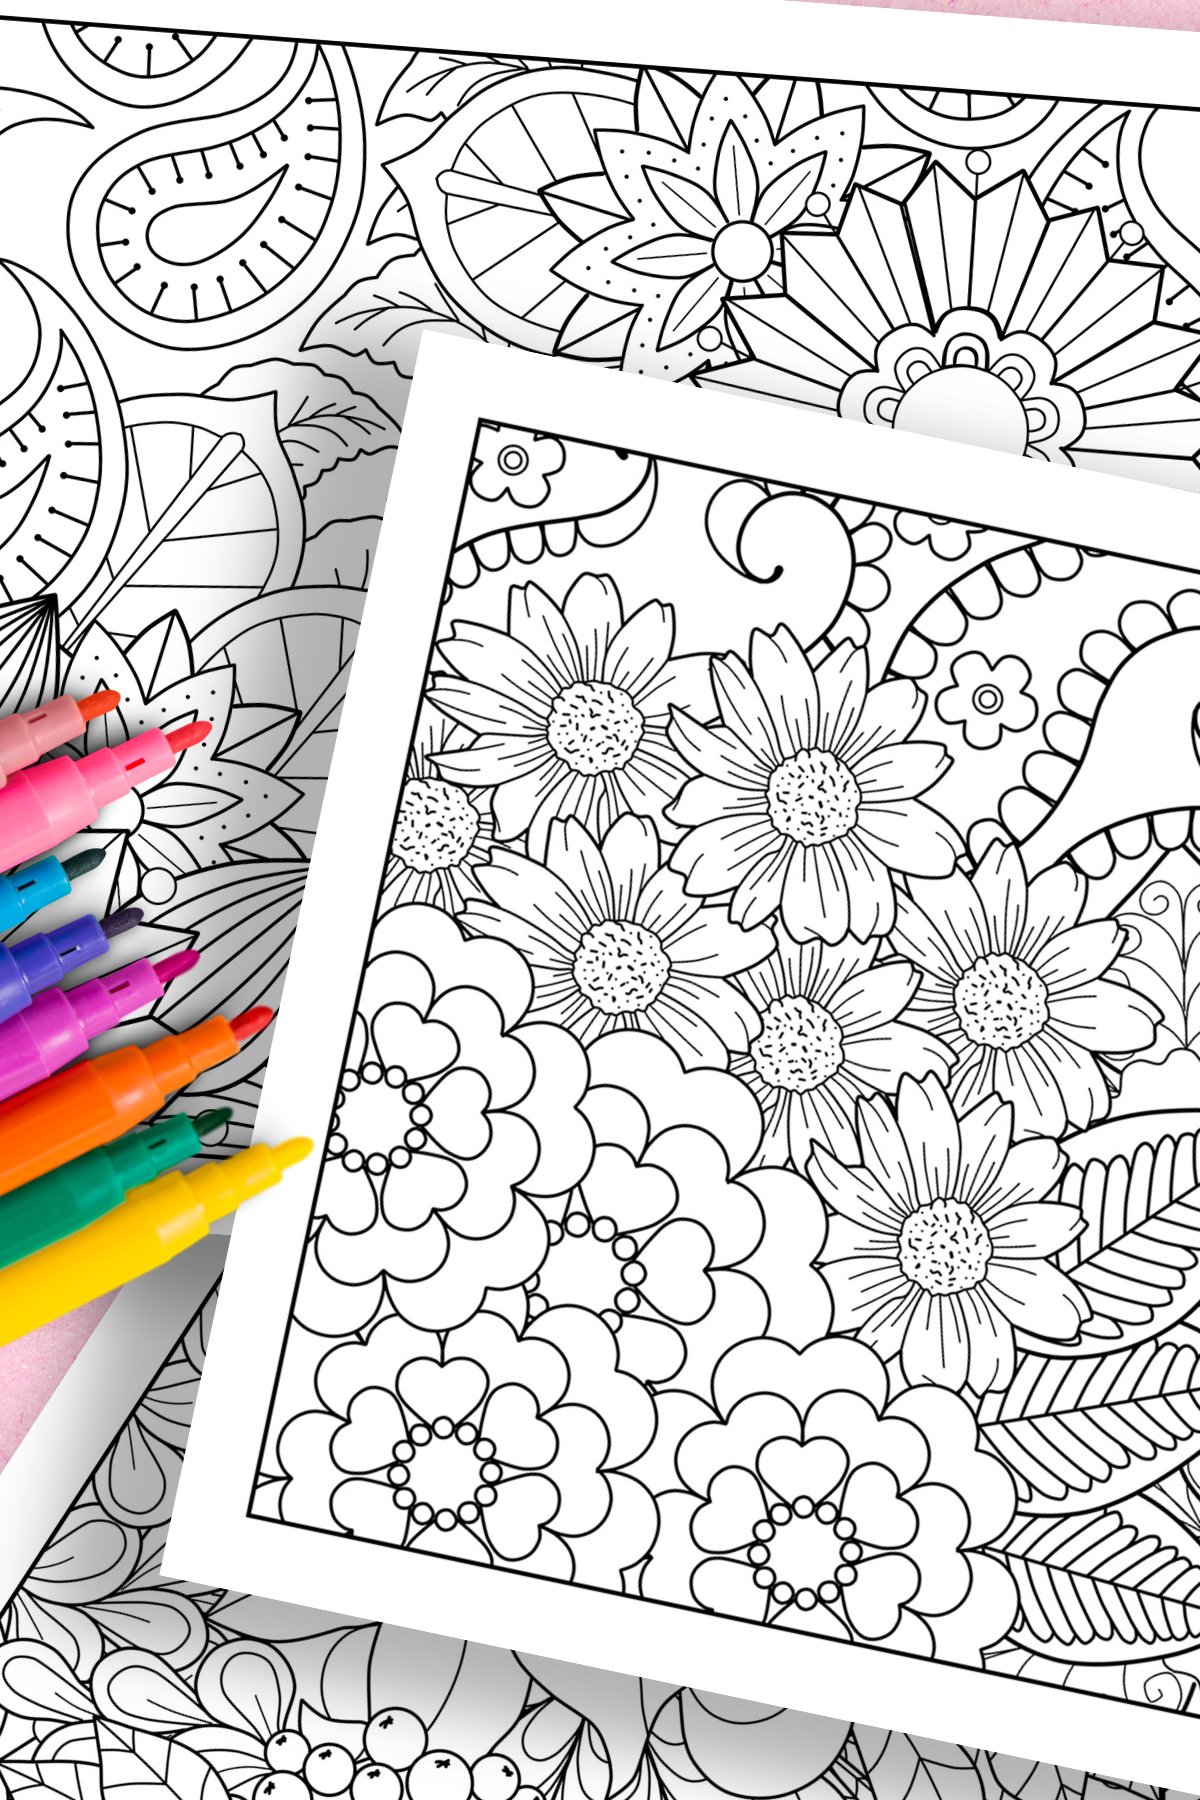 5 Printable, Mandala ,adult, Coloring Pages, Floral, Easy